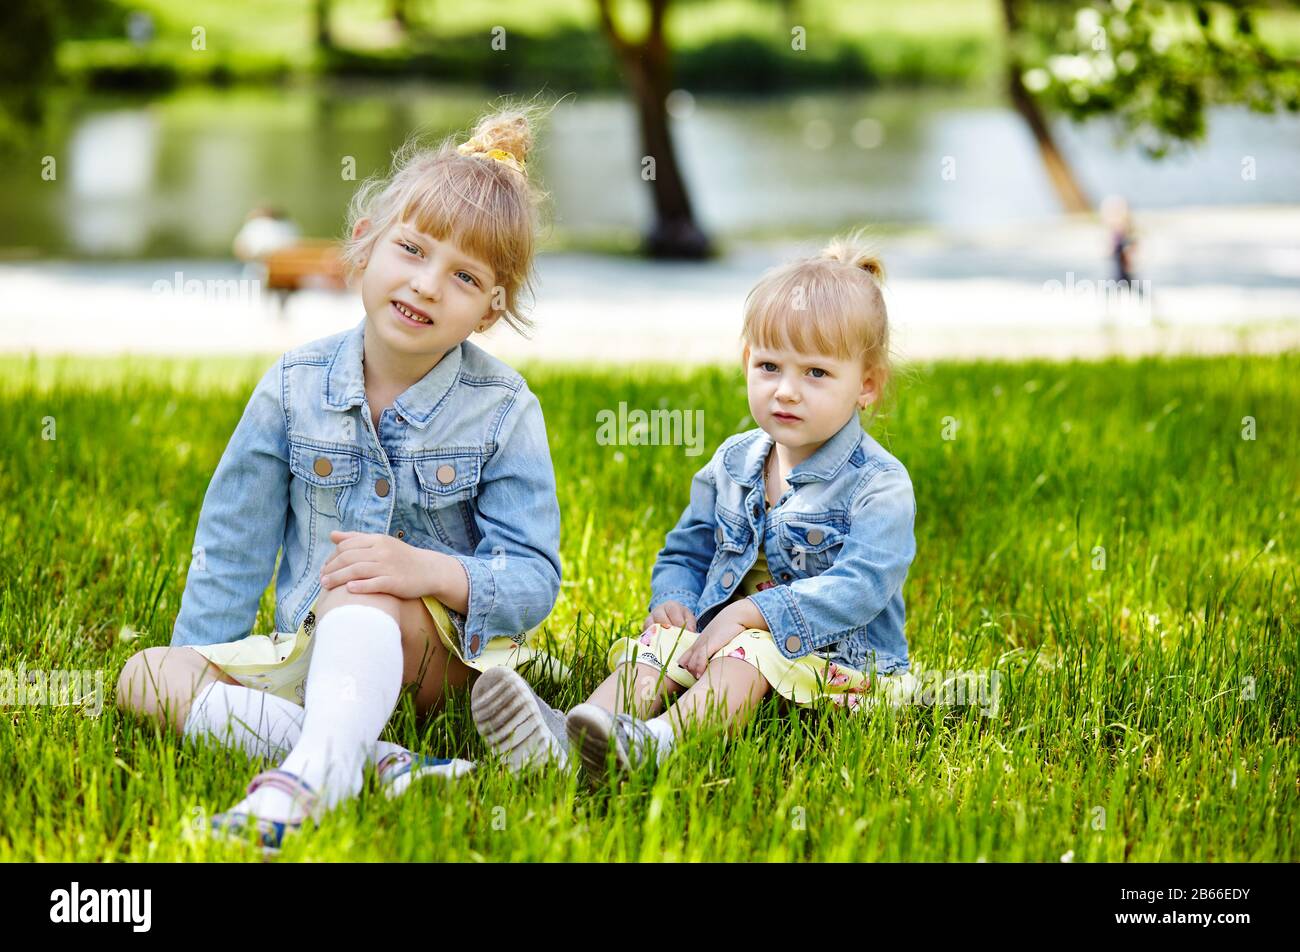 Adorable childs in blue trendy denim jaket posing outdoors. Girls having fun together. Little baby girls in the park. Summer or spring vacation Stock Photo